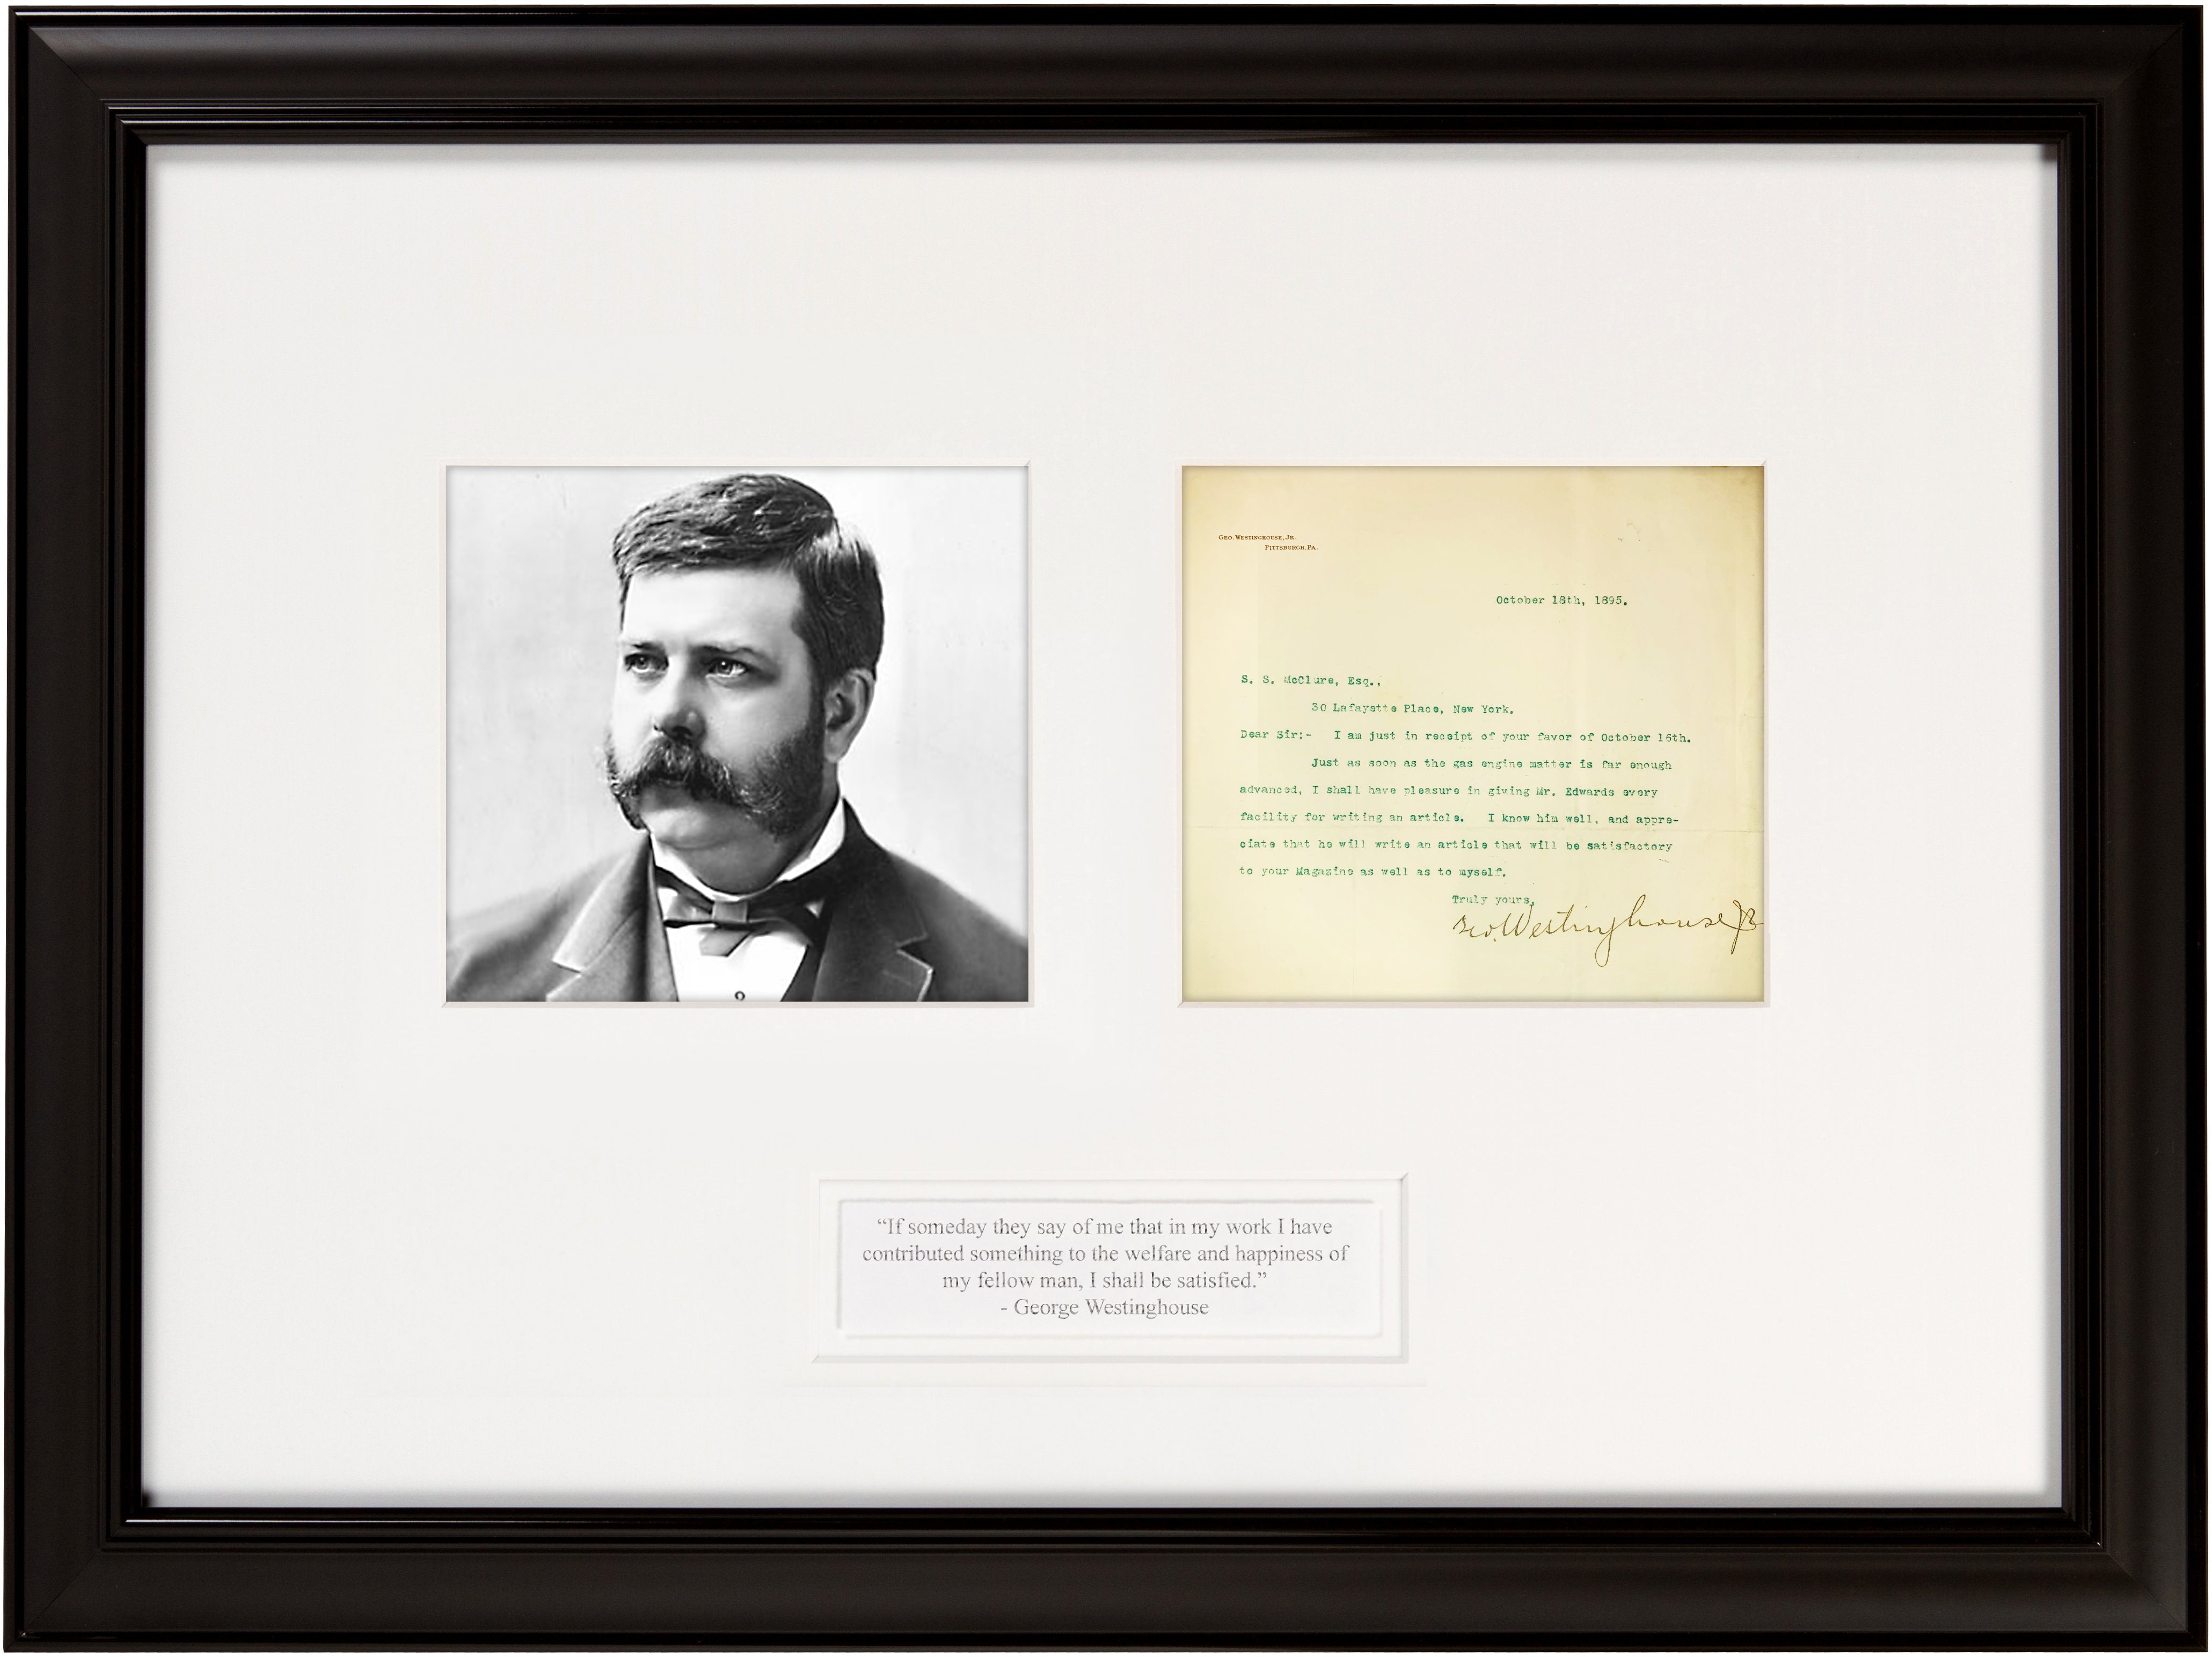 Rare George Westinghouse Signed 1895 Letter with invention content. “As soon as the gas engine matter is far enough advanced…”